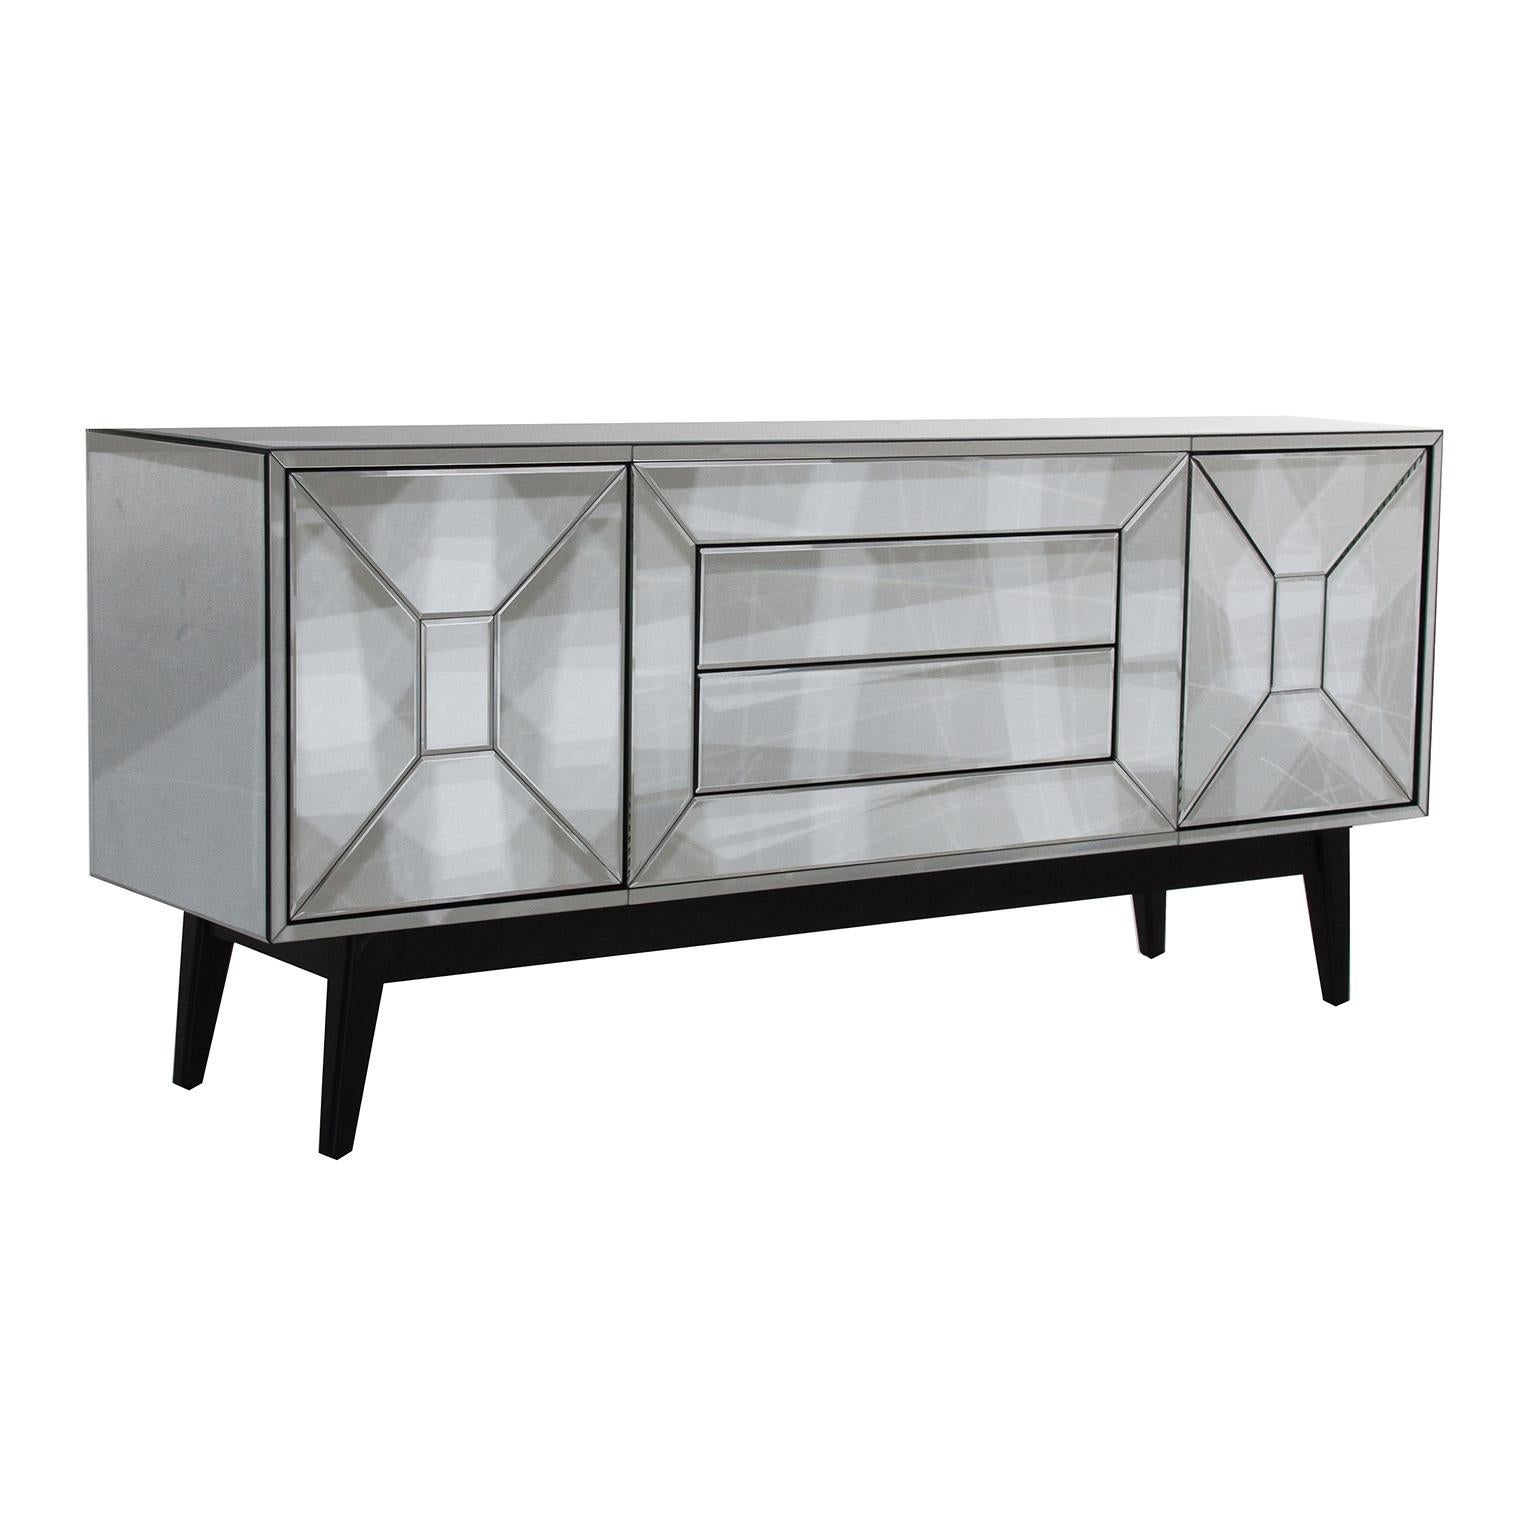 Sparkling and sophisticated all in beveled mirrored sideboard with black wooden and compas feet, two beveled mirrored doors with push-open system and two drawers in the middle. Harmonious lines, graphic and original design.